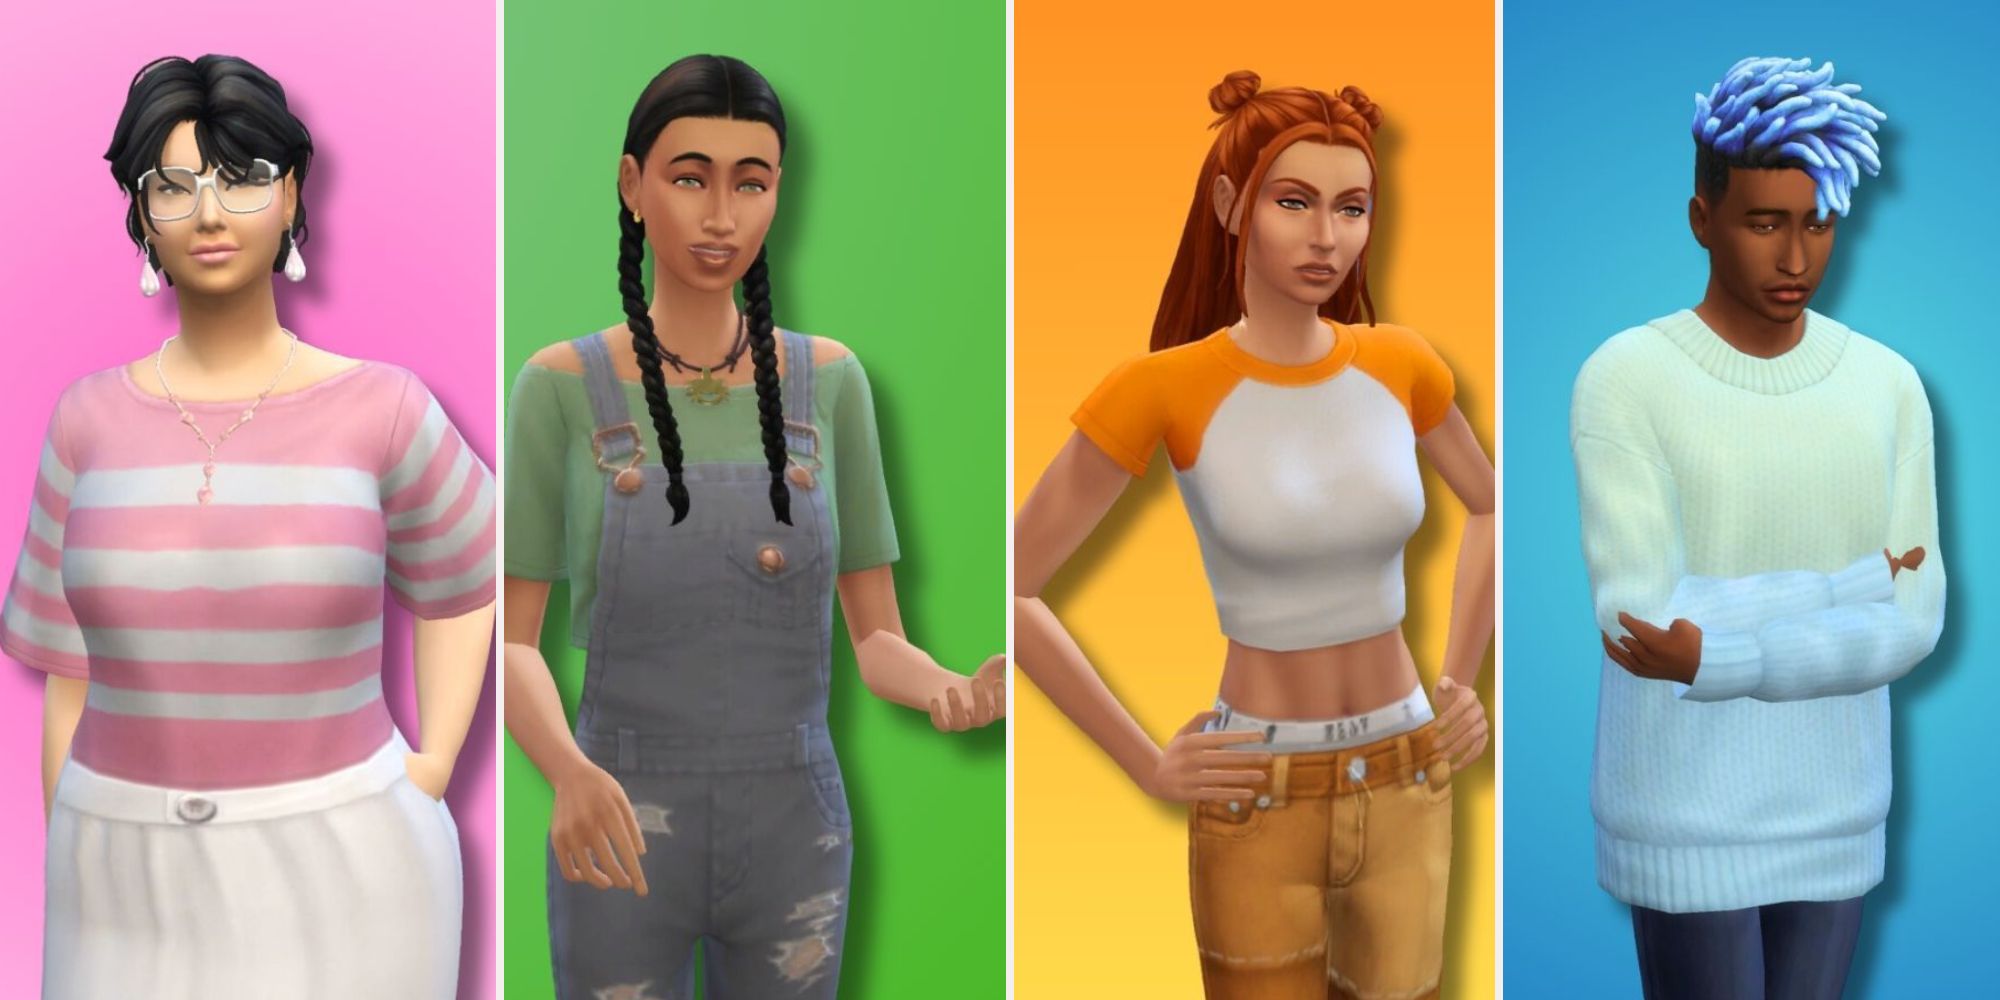 Not so berry sims pink green orange and blue